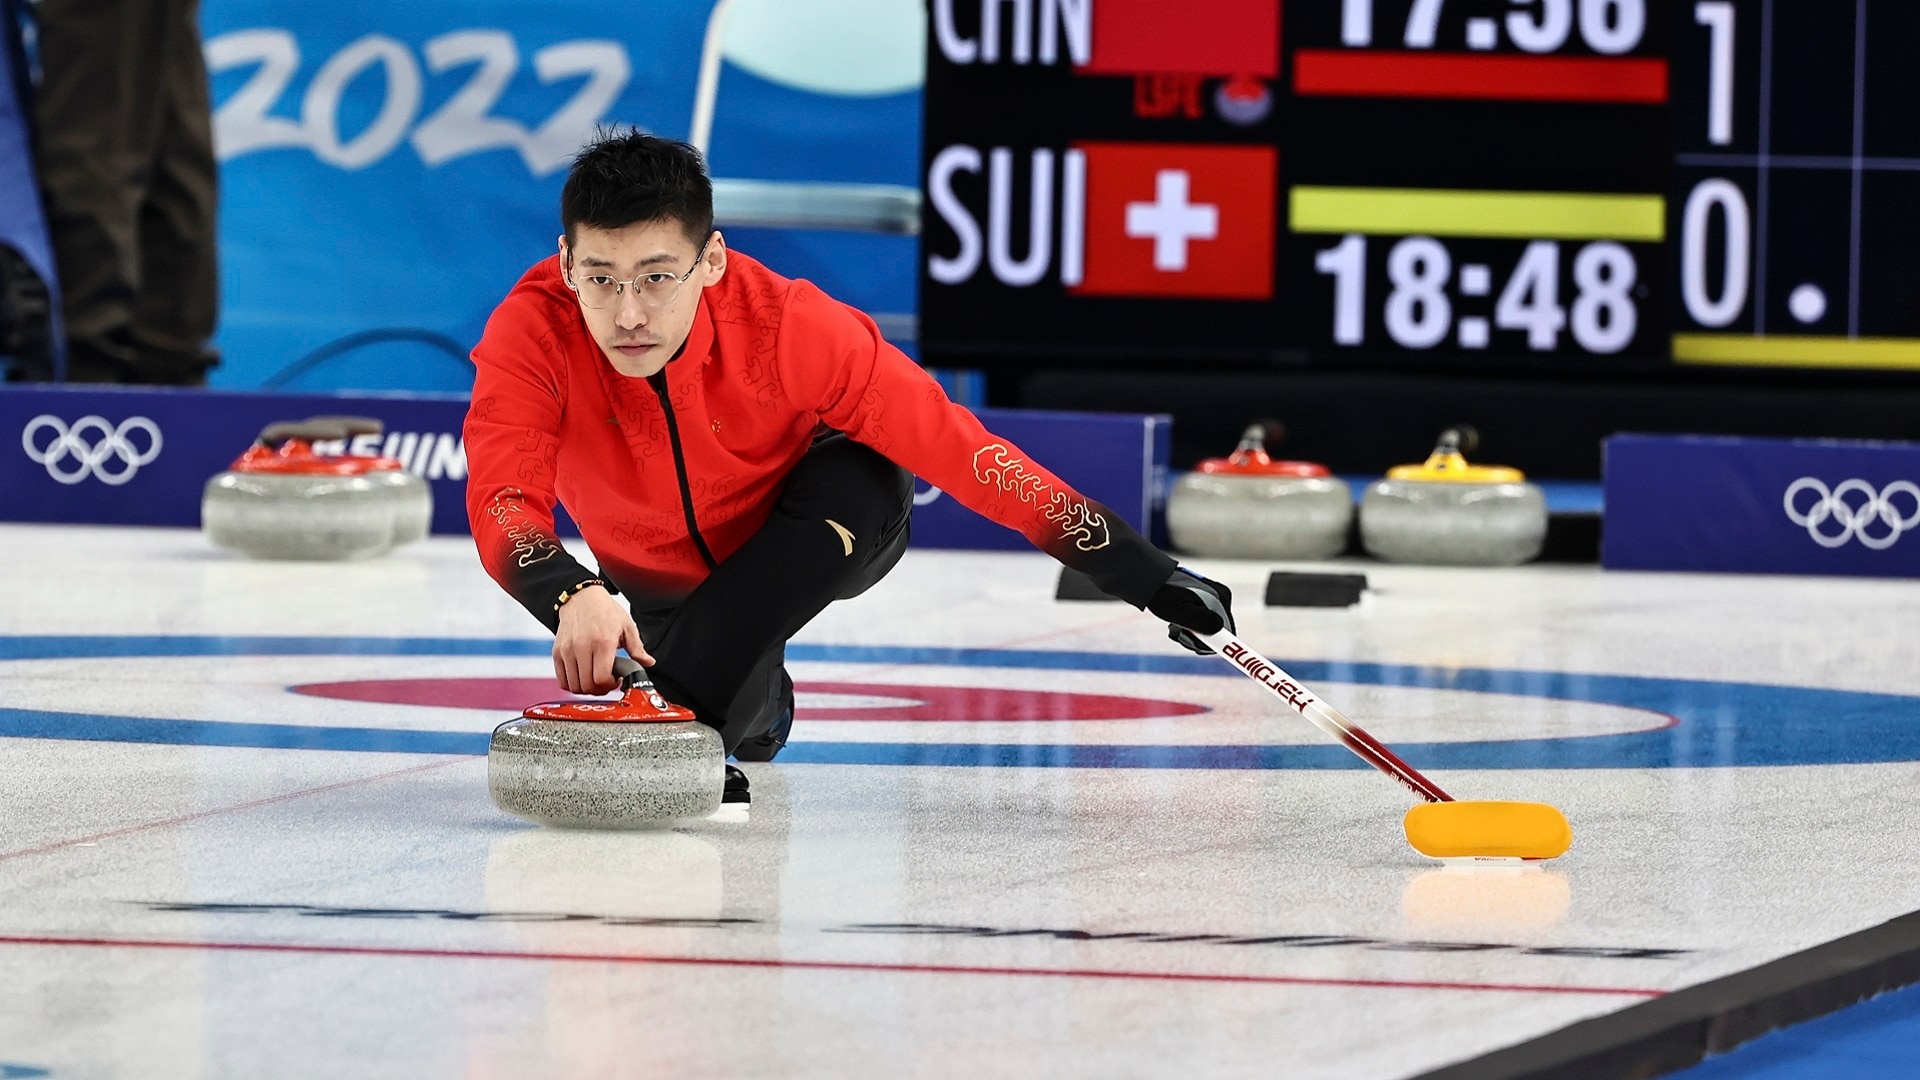 Curling: Ling Zhi of Team China competes during the Mixed Doubles Round Robin of the 2022 Winter Olympics. 1920x1080 Full HD Background.